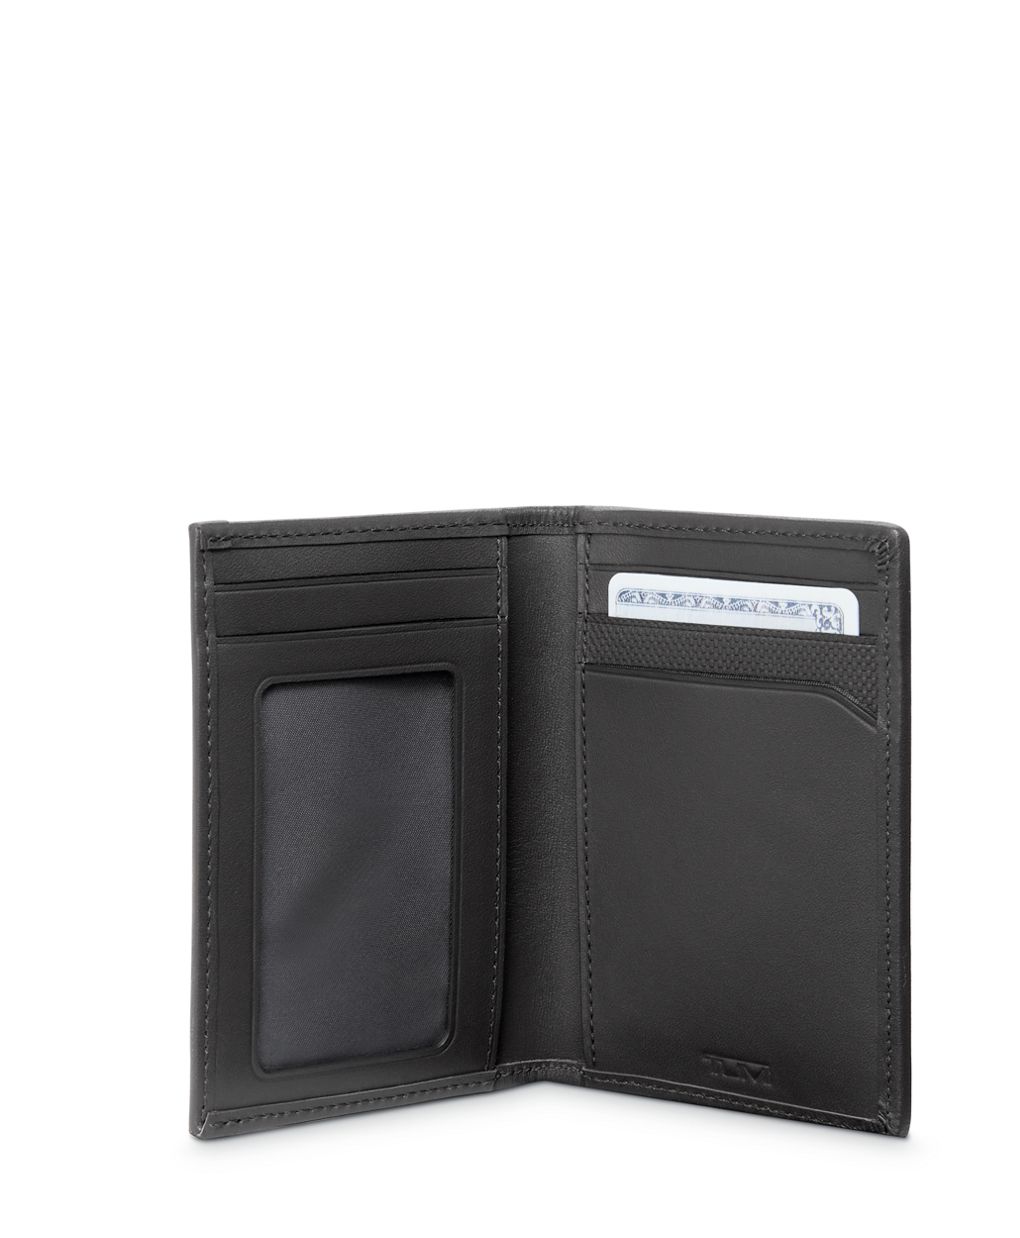 Passport Cover Black Grained Calfskin with CD Icon Signature